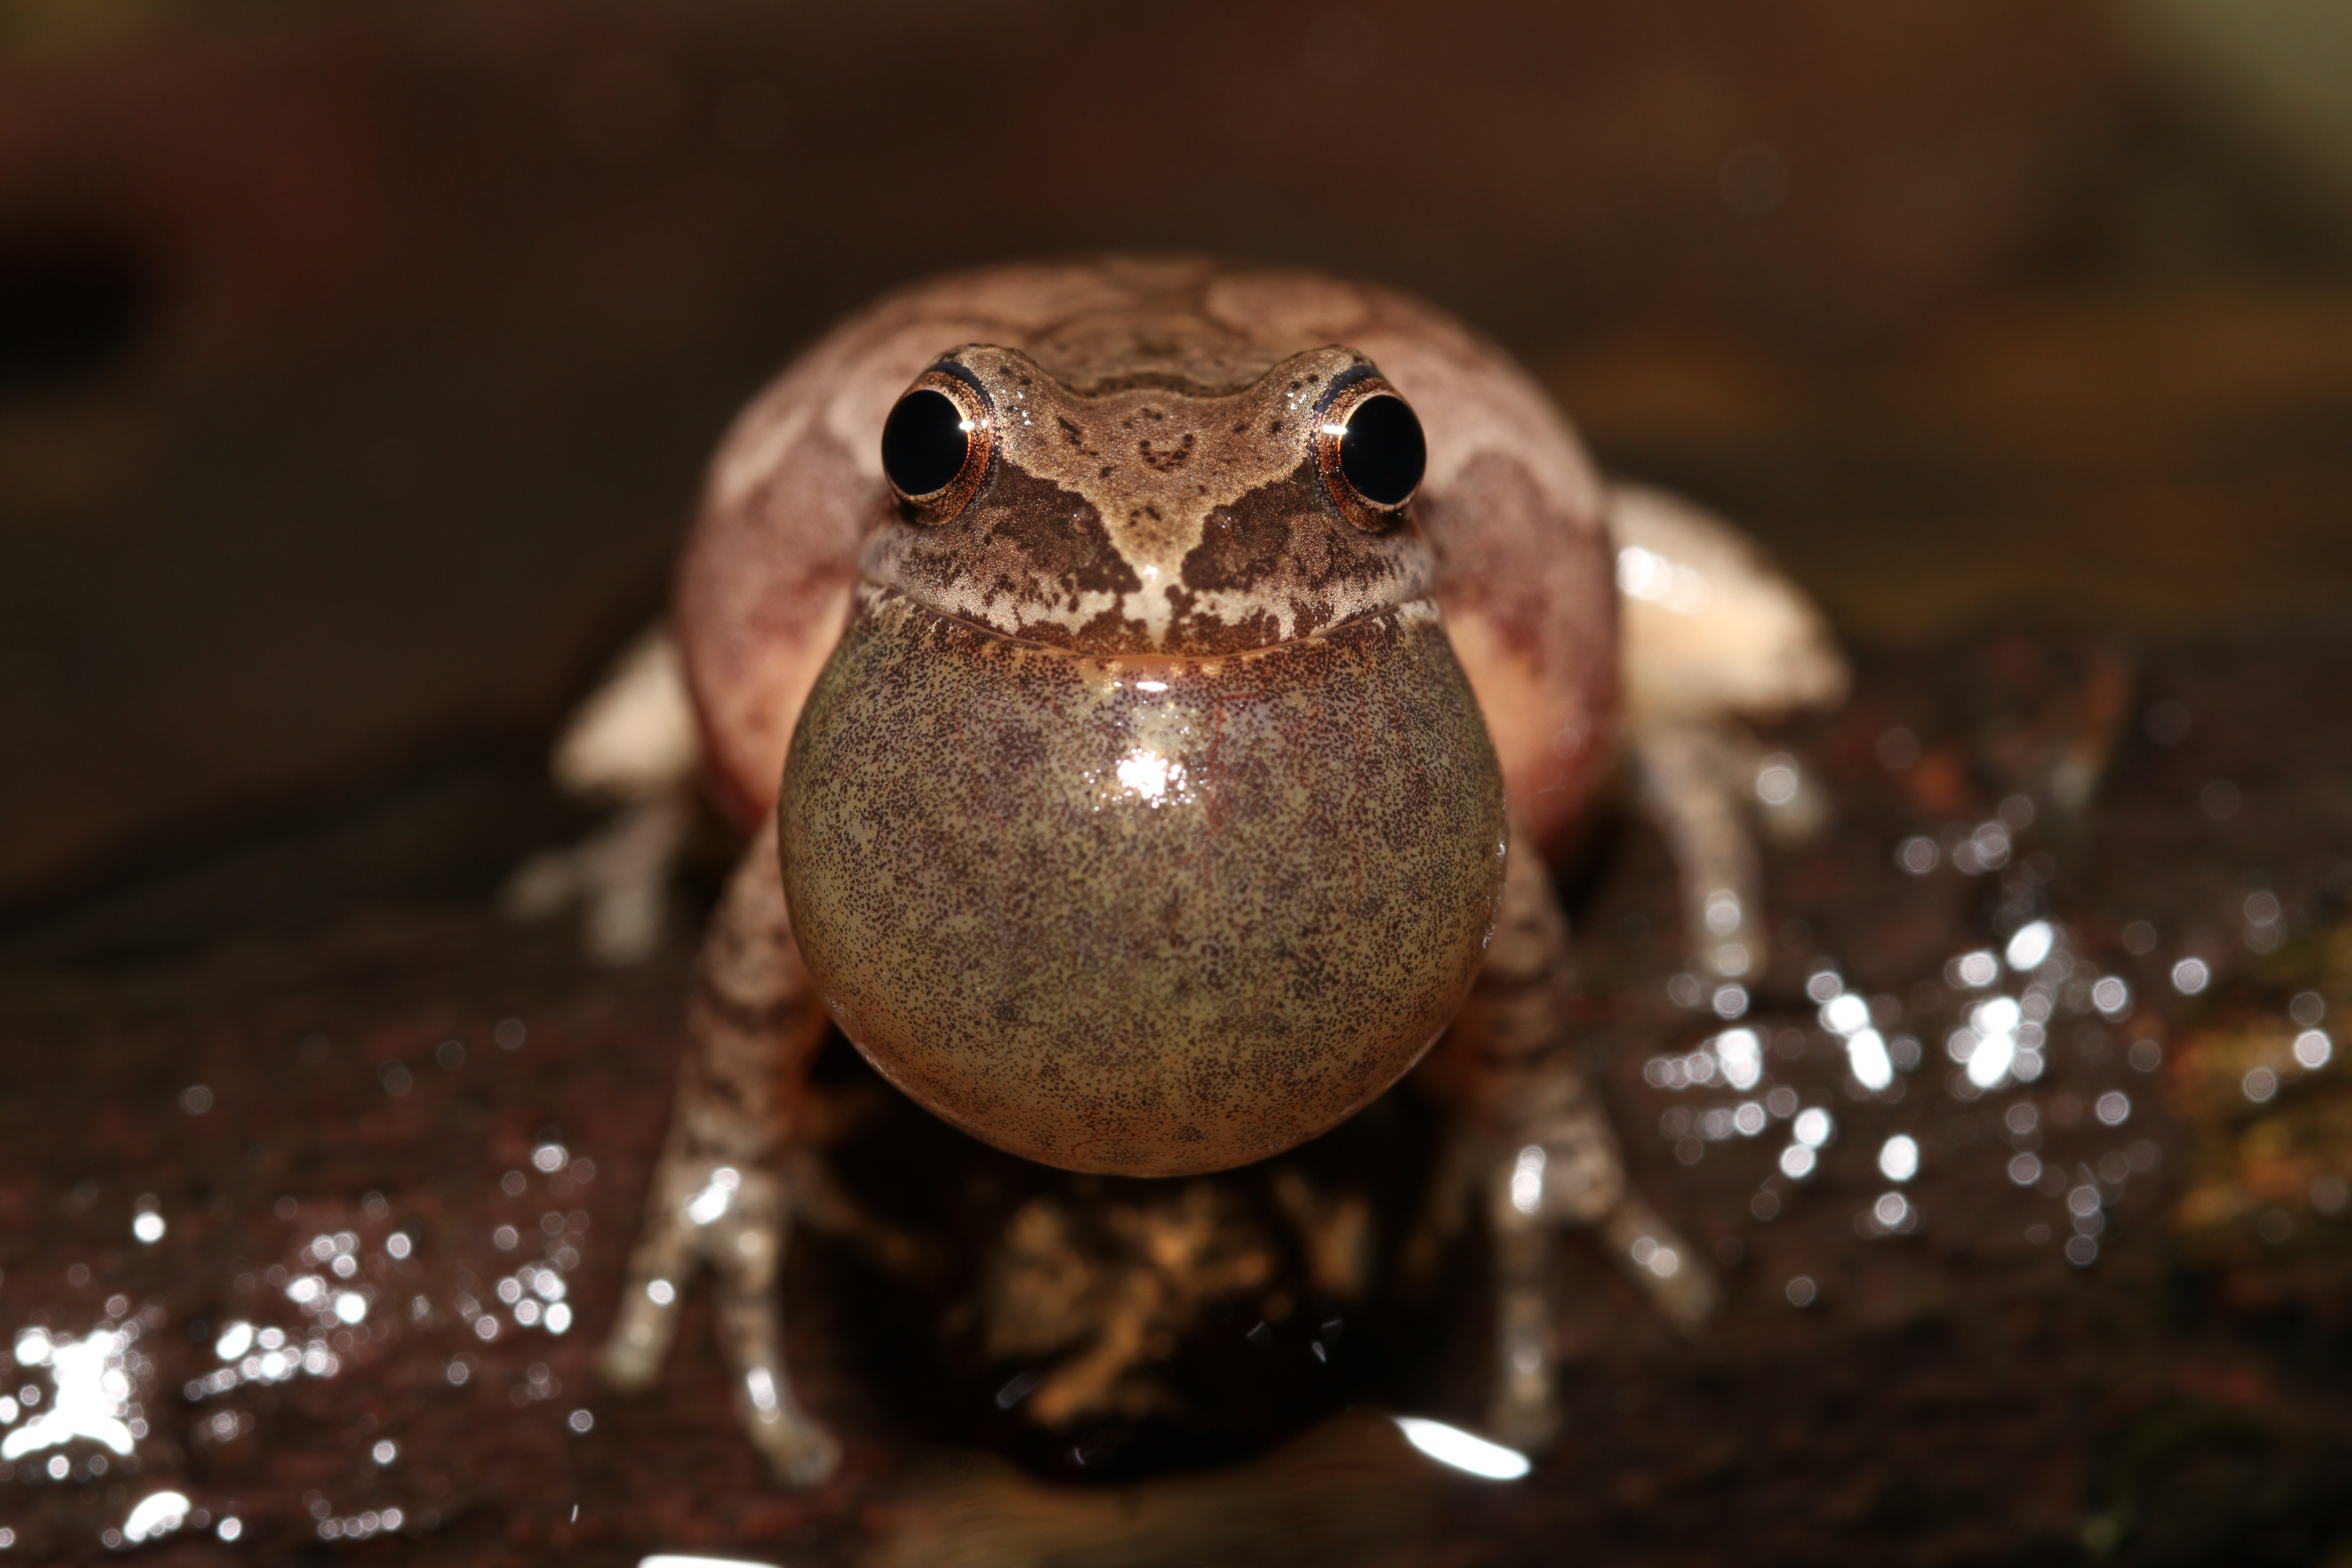 A small brown frog expands a large sac under its chin.